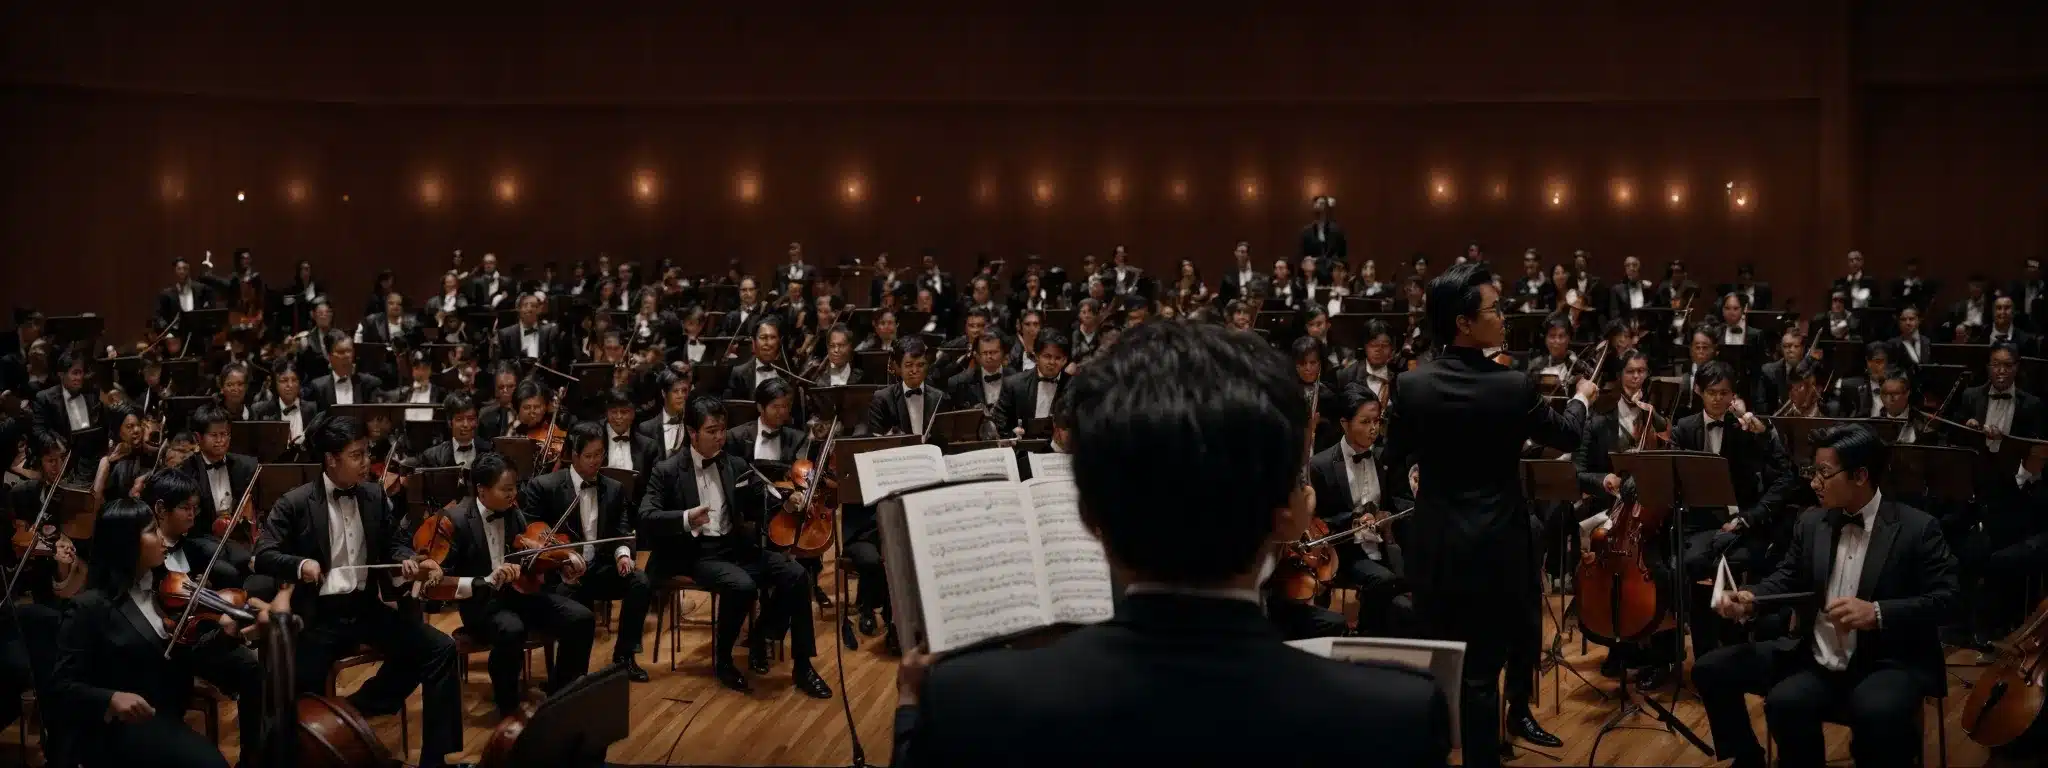 A Conductor Stands Before An Attentive Orchestra, Poised To Guide A Harmonious Performance.